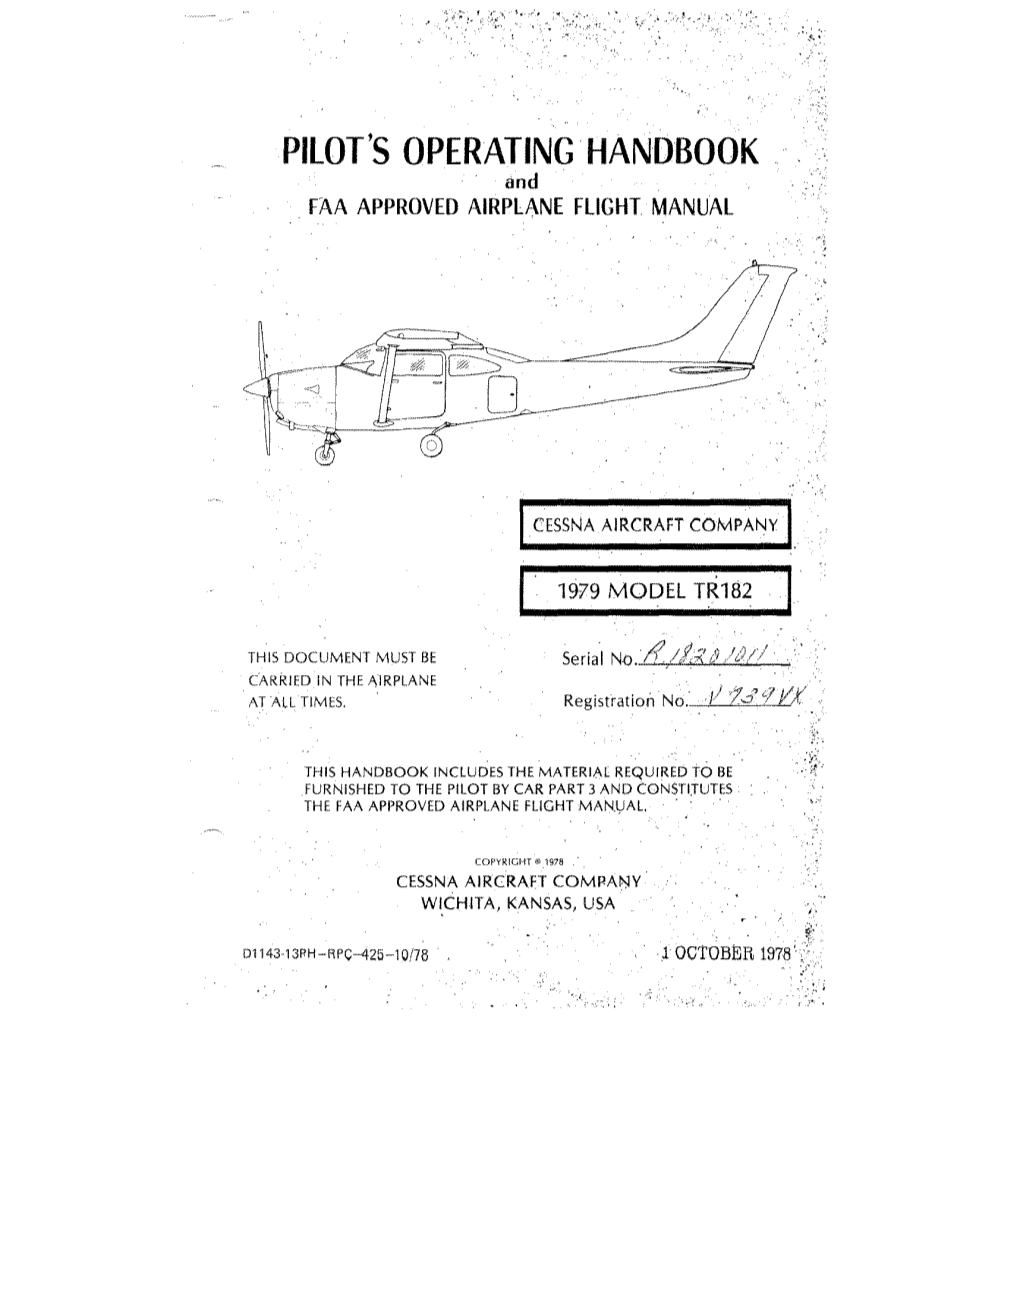 PILOT's OPERATING' HANDBOOK and , FAA APPROVED AIRPLANE FLIGHT MANUAL